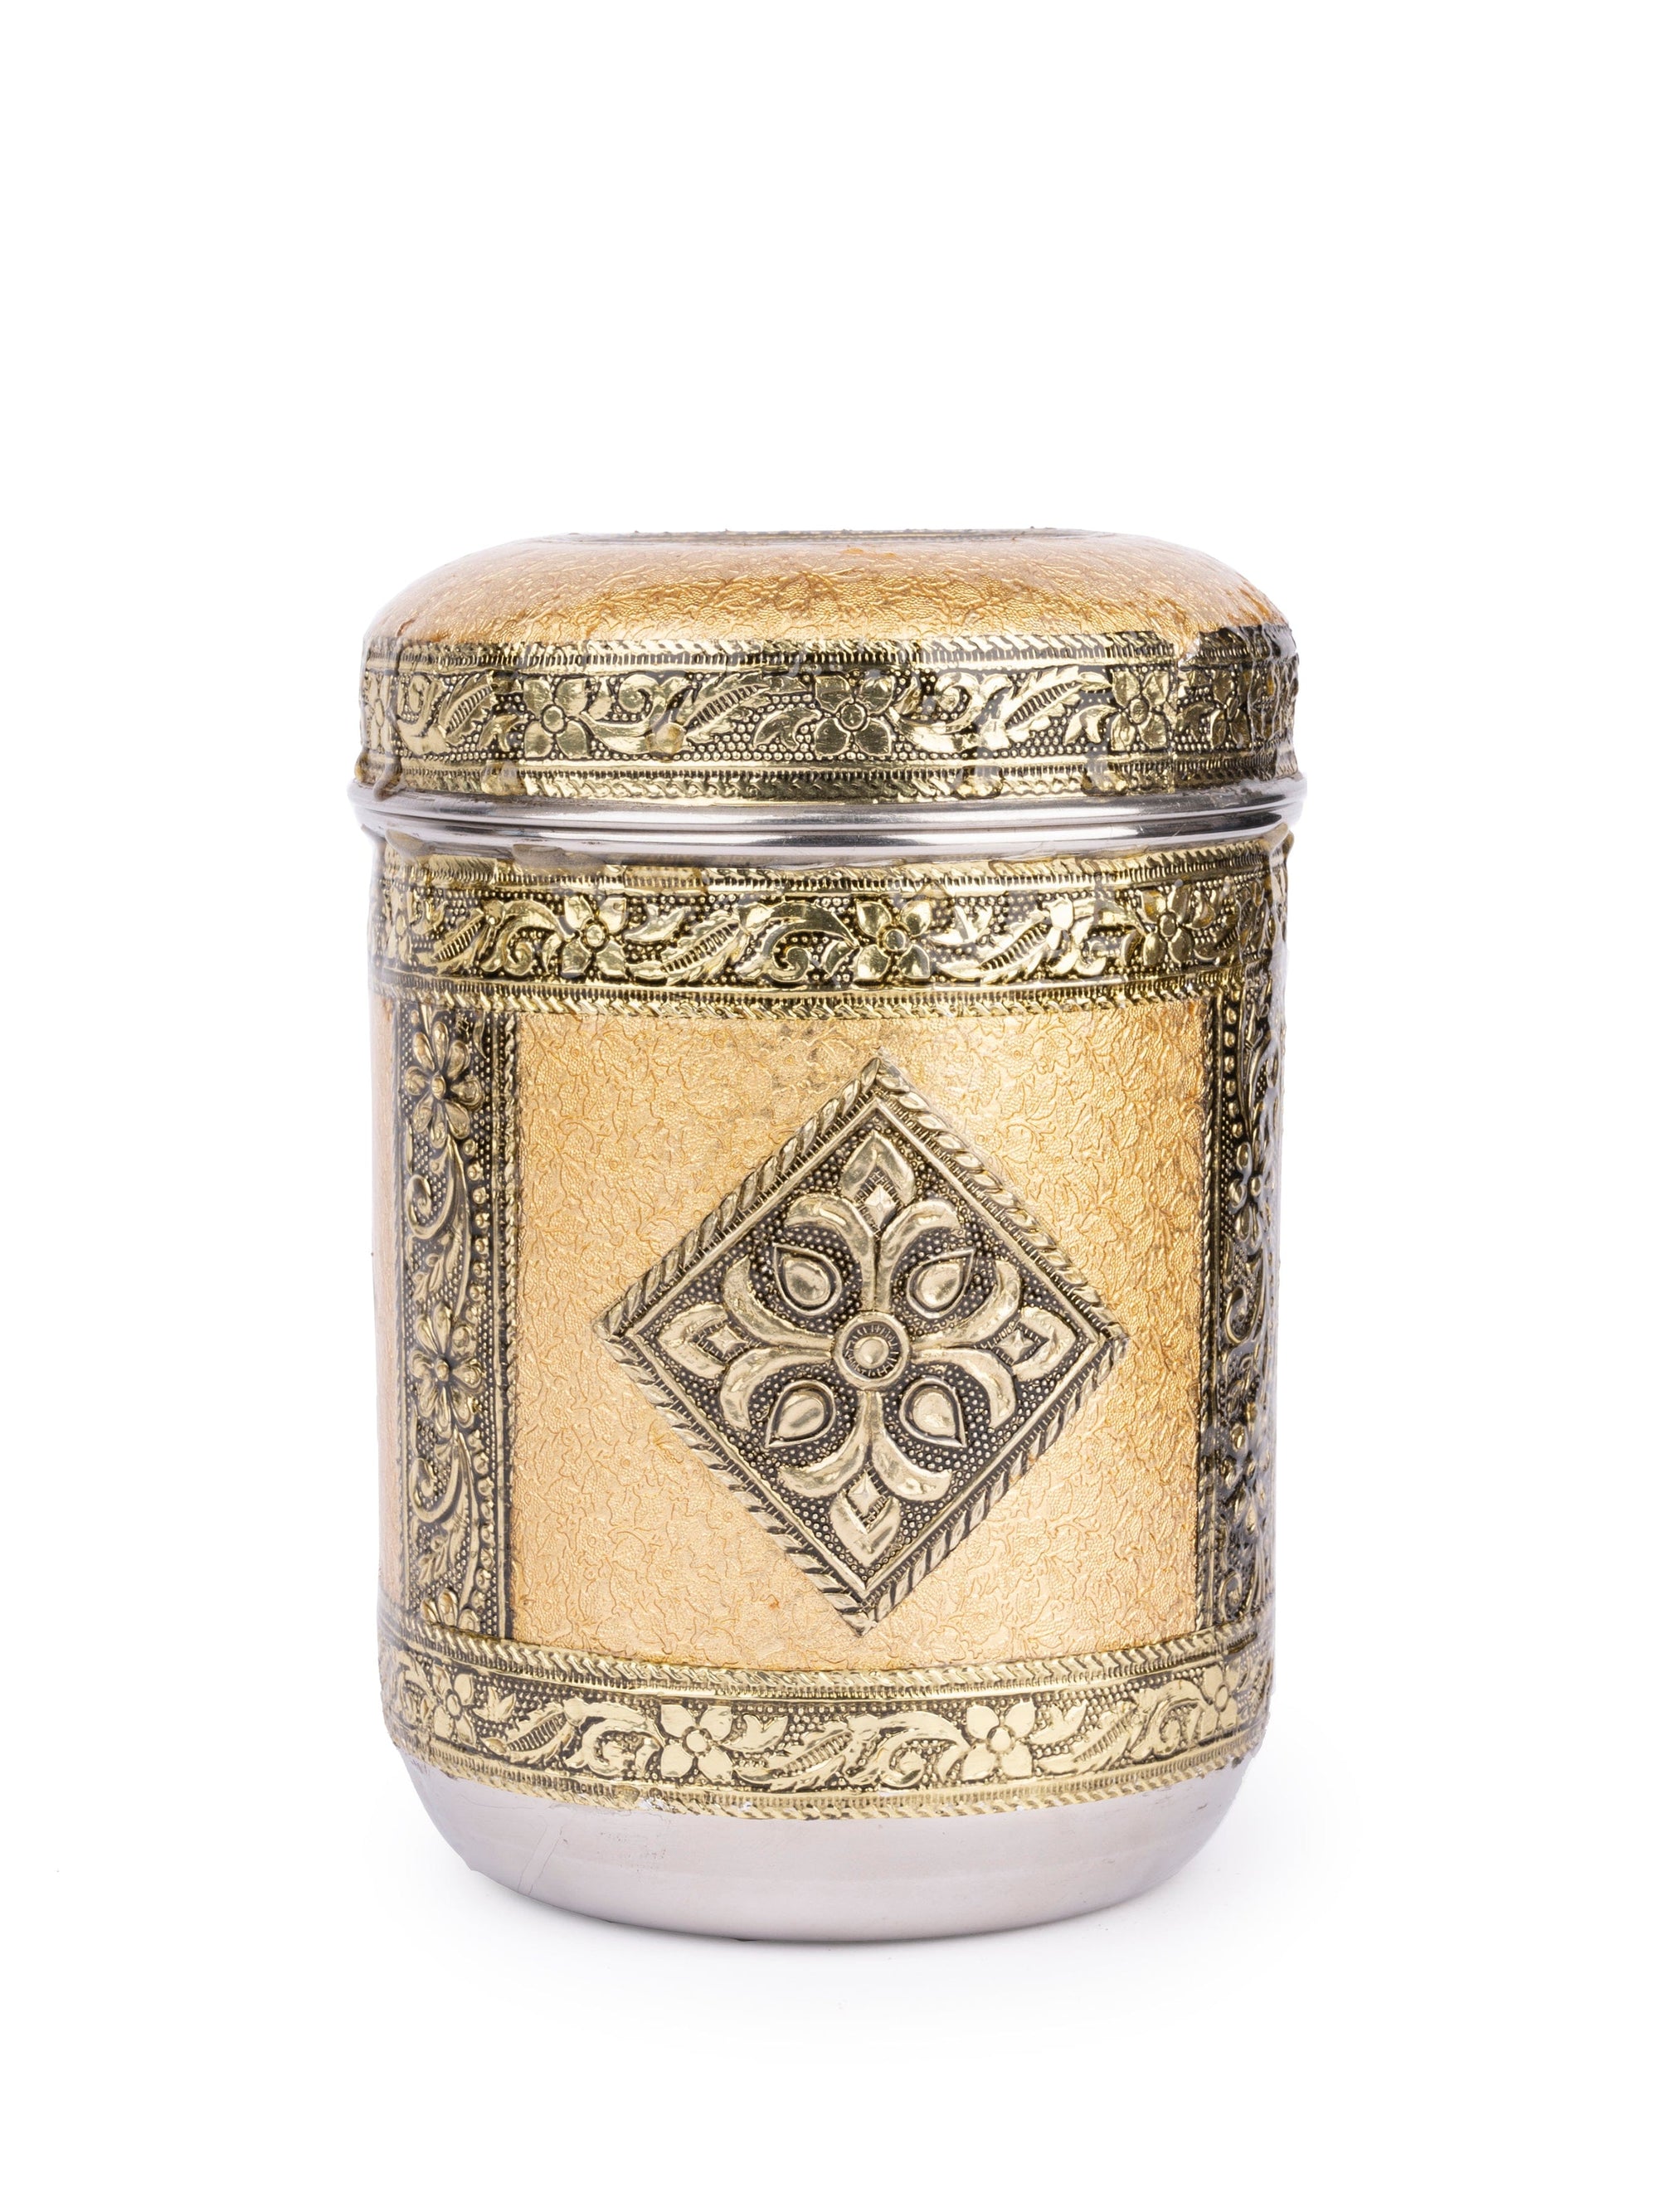 Stainless Steel Multipurpose Kitchen Canister with Meenakari work Laminated on the Exteriors - The Heritage Artifacts